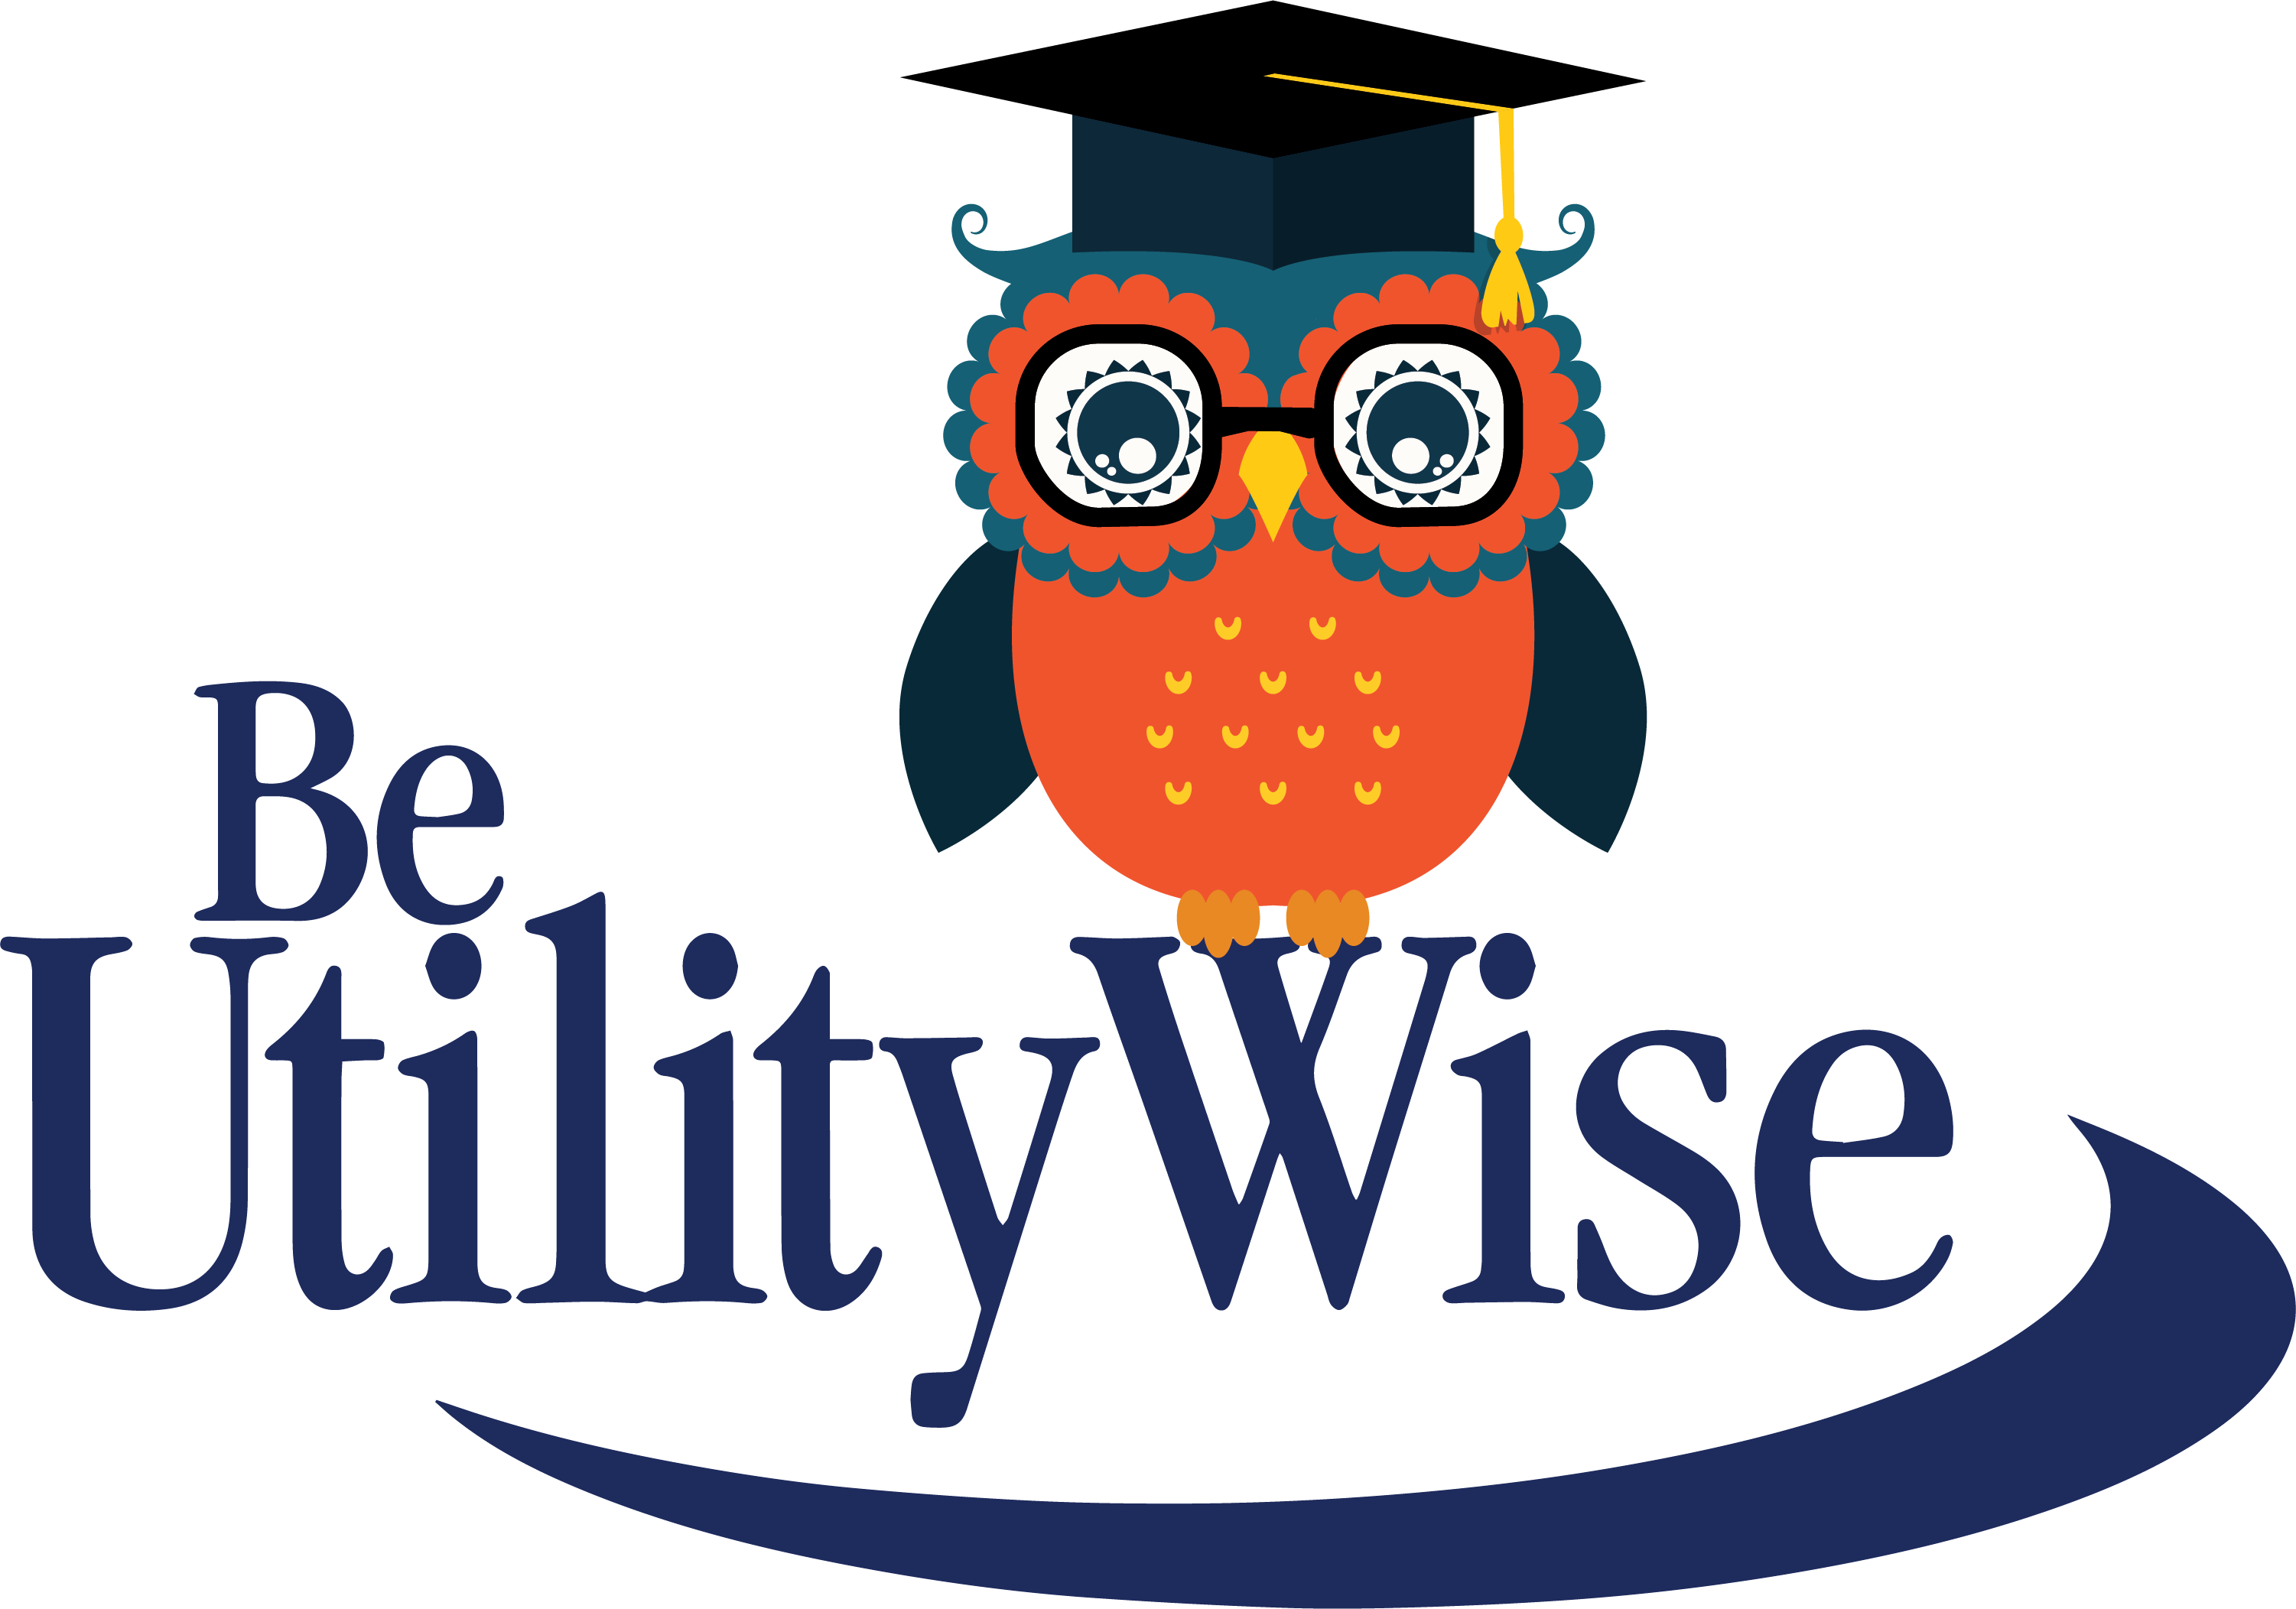 Beutilitywise With Large Owl